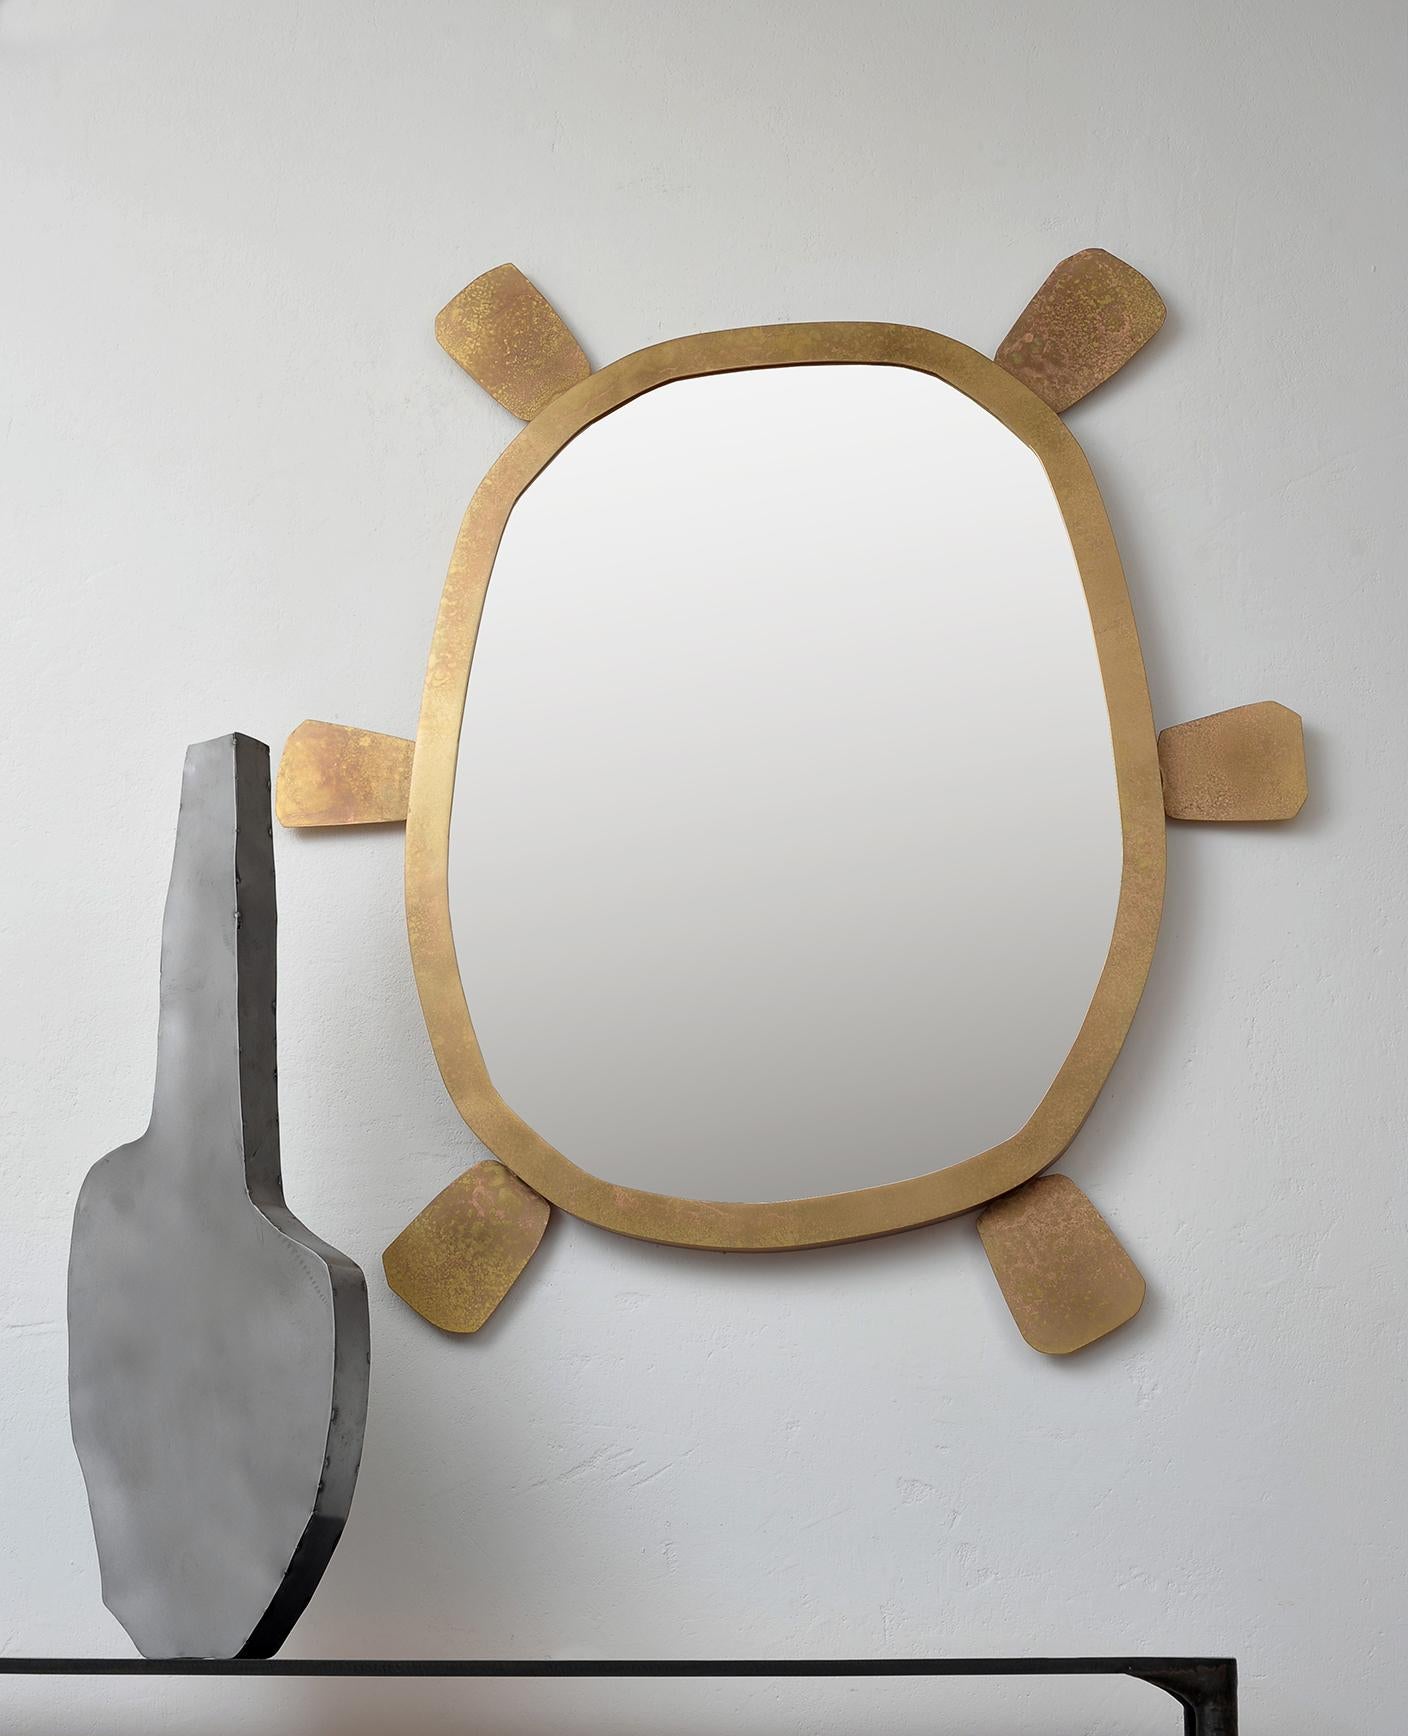 Brass mirror by Lukasz Friedrich.
Materials: patinated brass.
Dimensions: 4.5 D x 90 W x 105 H cm.
Also available in Dark Patina.

Lukasz Friedrich (born 1980), lives and works in Warsaw. He is a self-taught
designer and craftsman. Lukasz grew up in